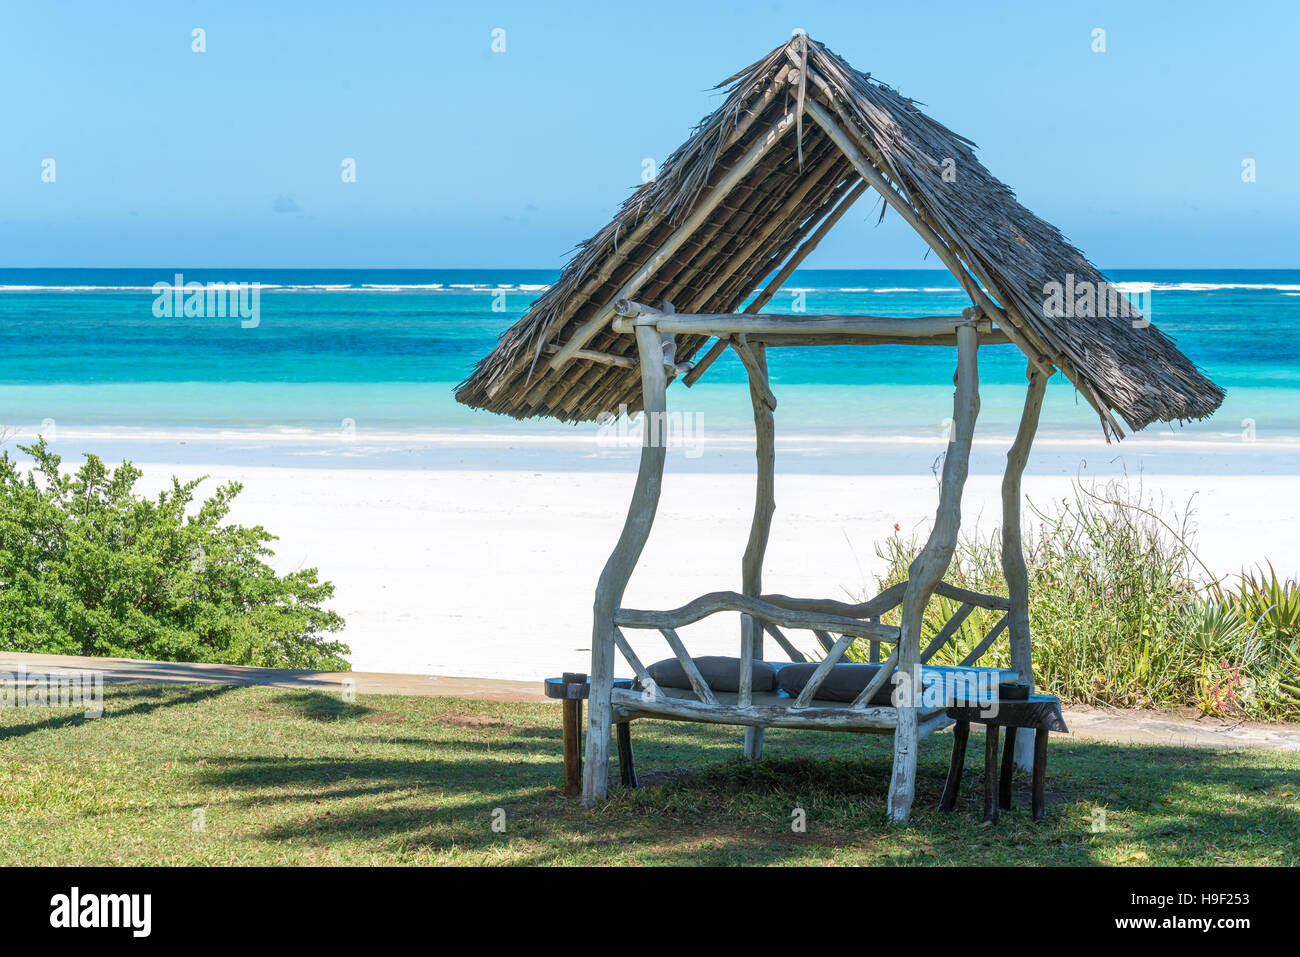 A shaded resting place with a thatched roof along Diani Beach Stock Photo